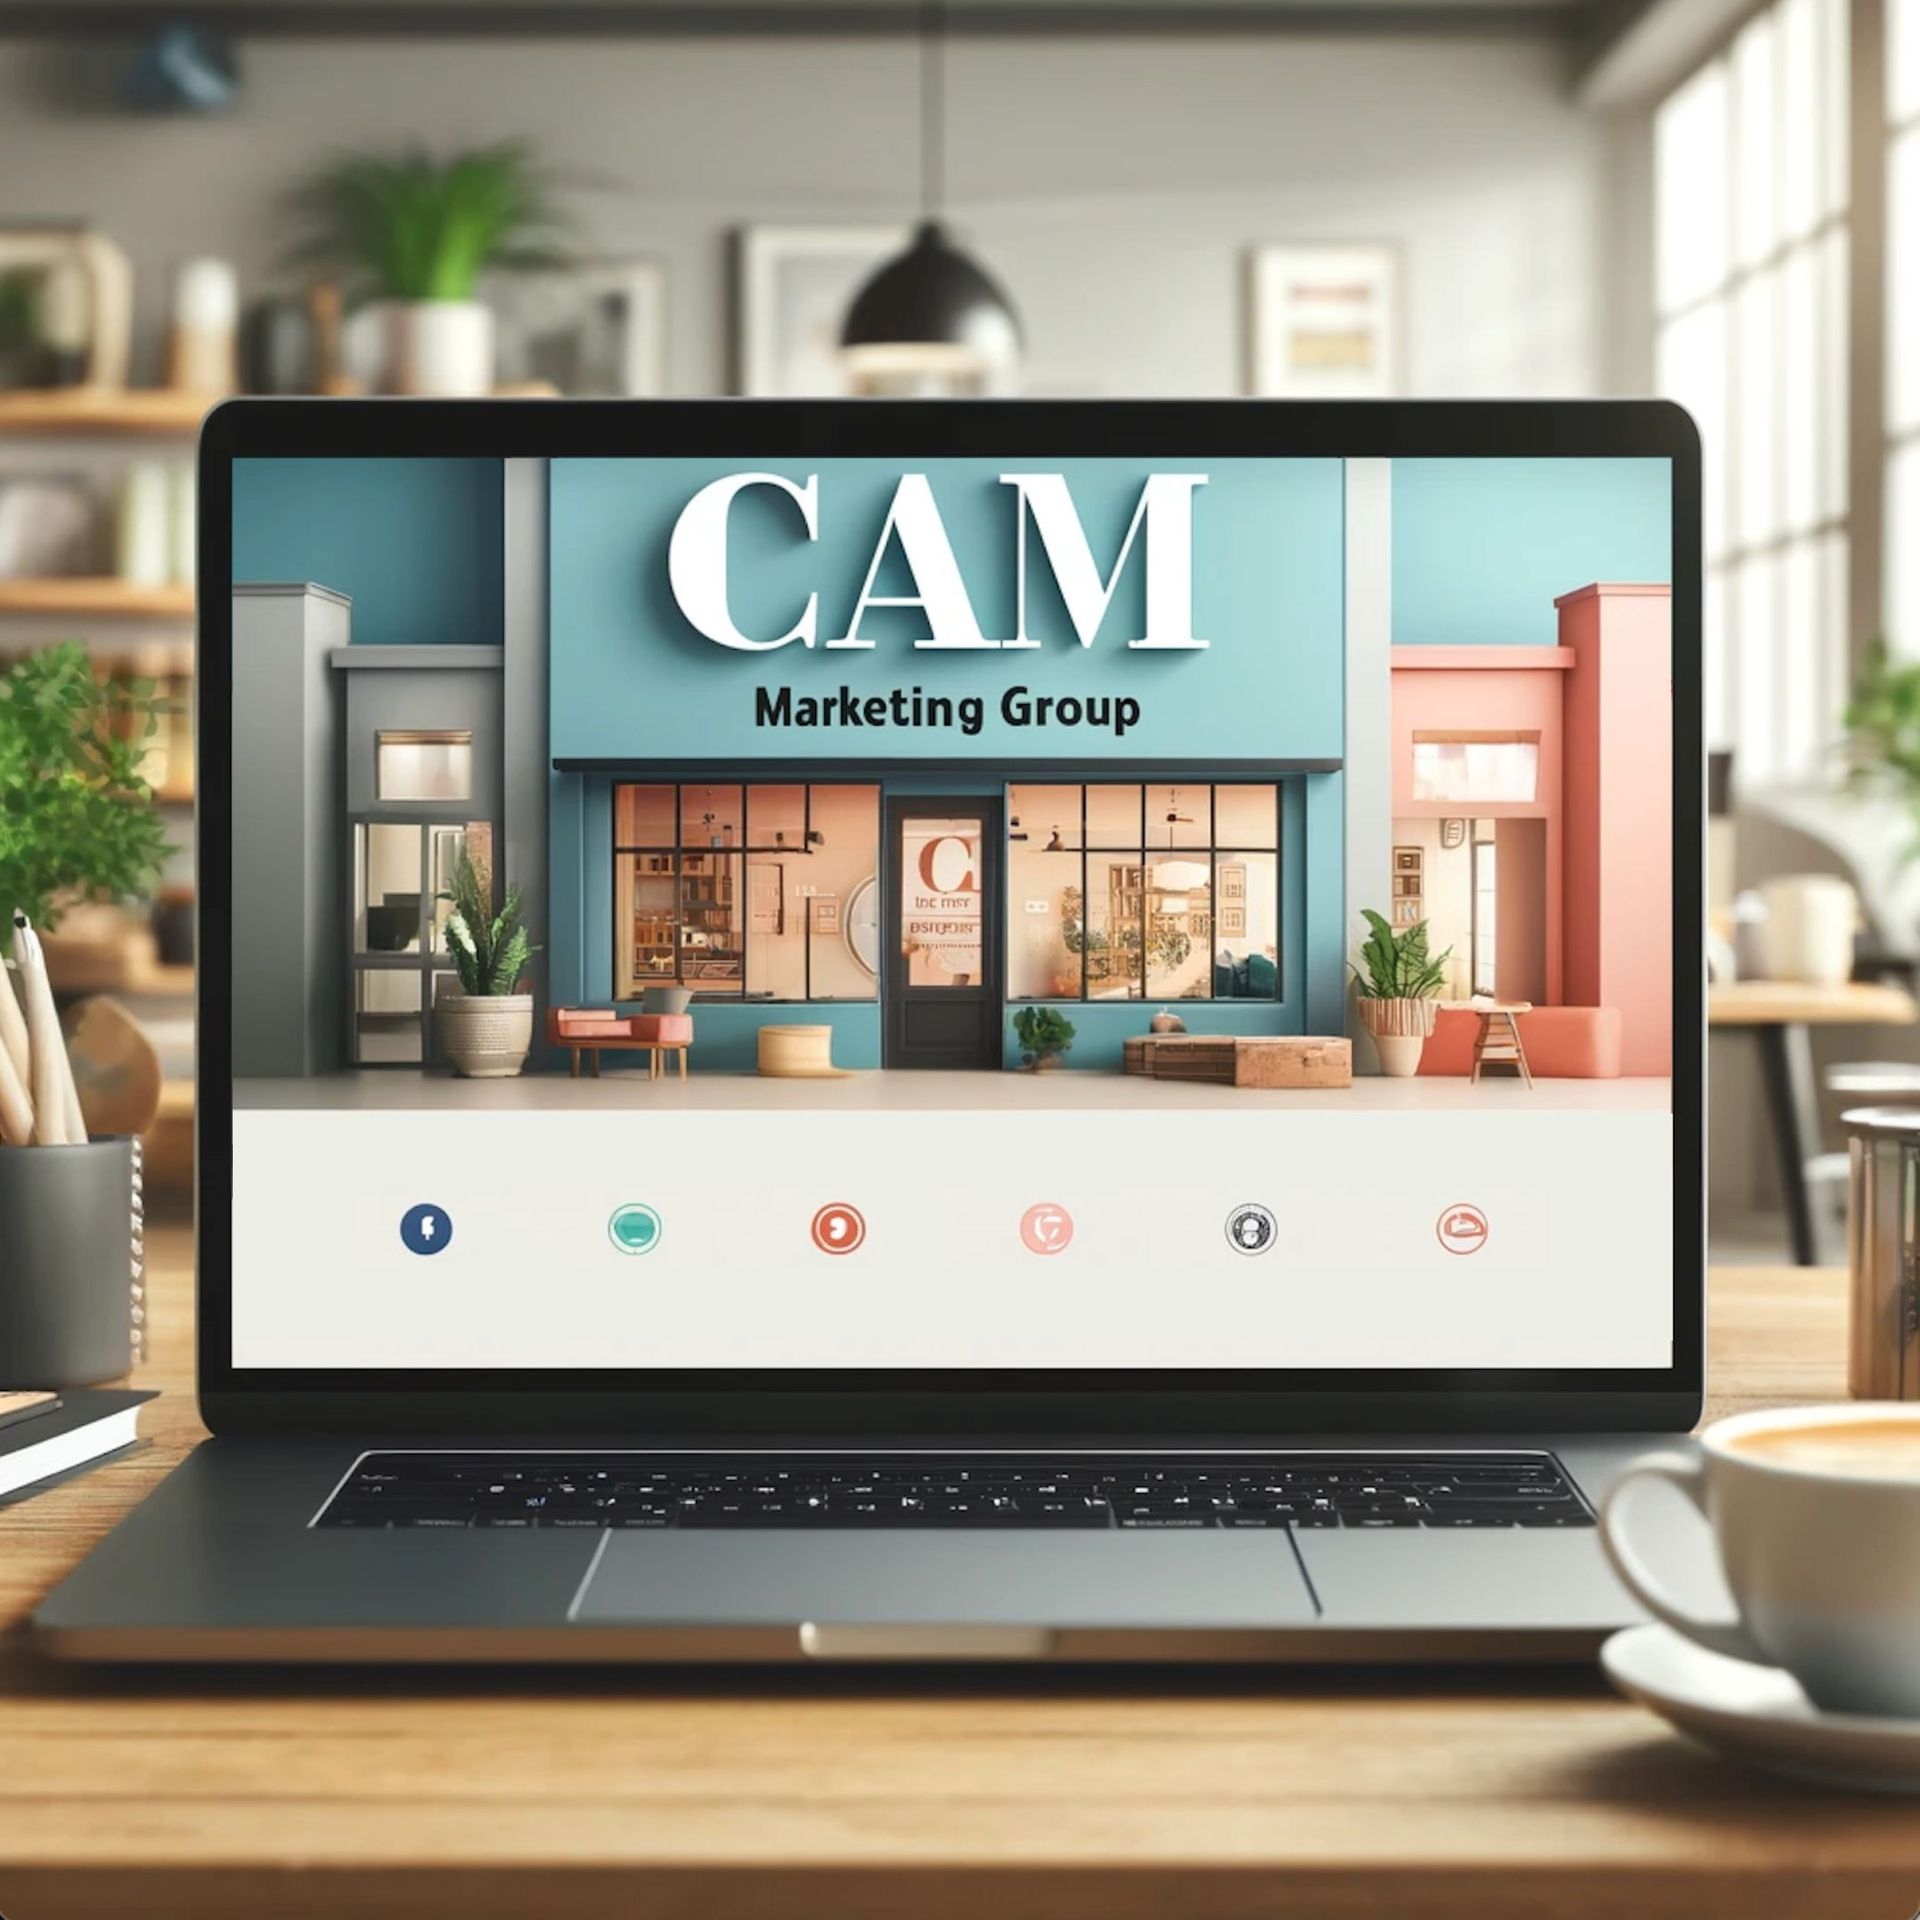 A laptop is open to the cam marketing group website